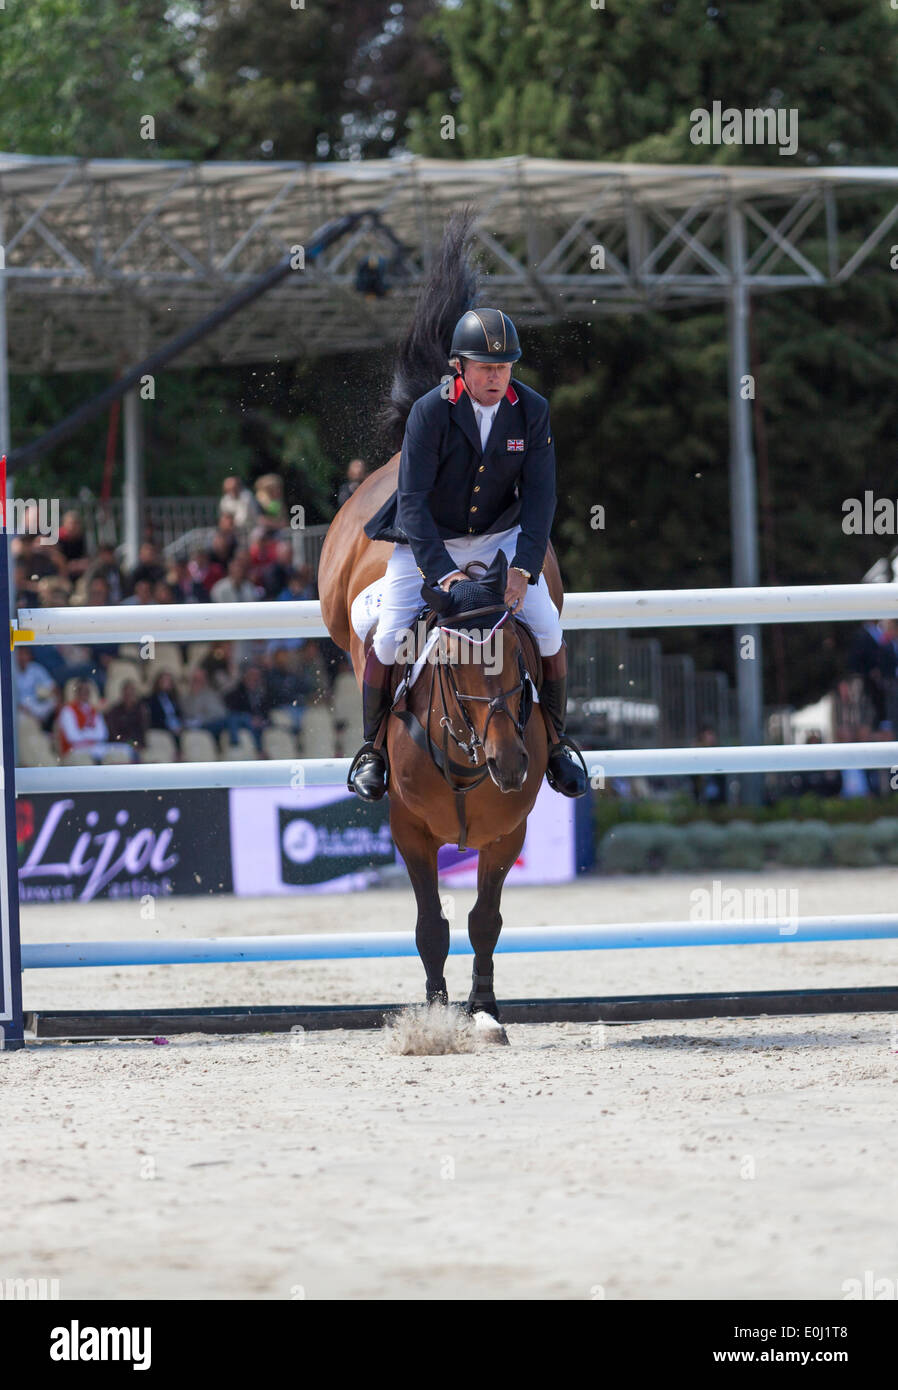 Nick Skelton on Big Star at Piazza di Sienna showjumping event 2013 , Stock Photo